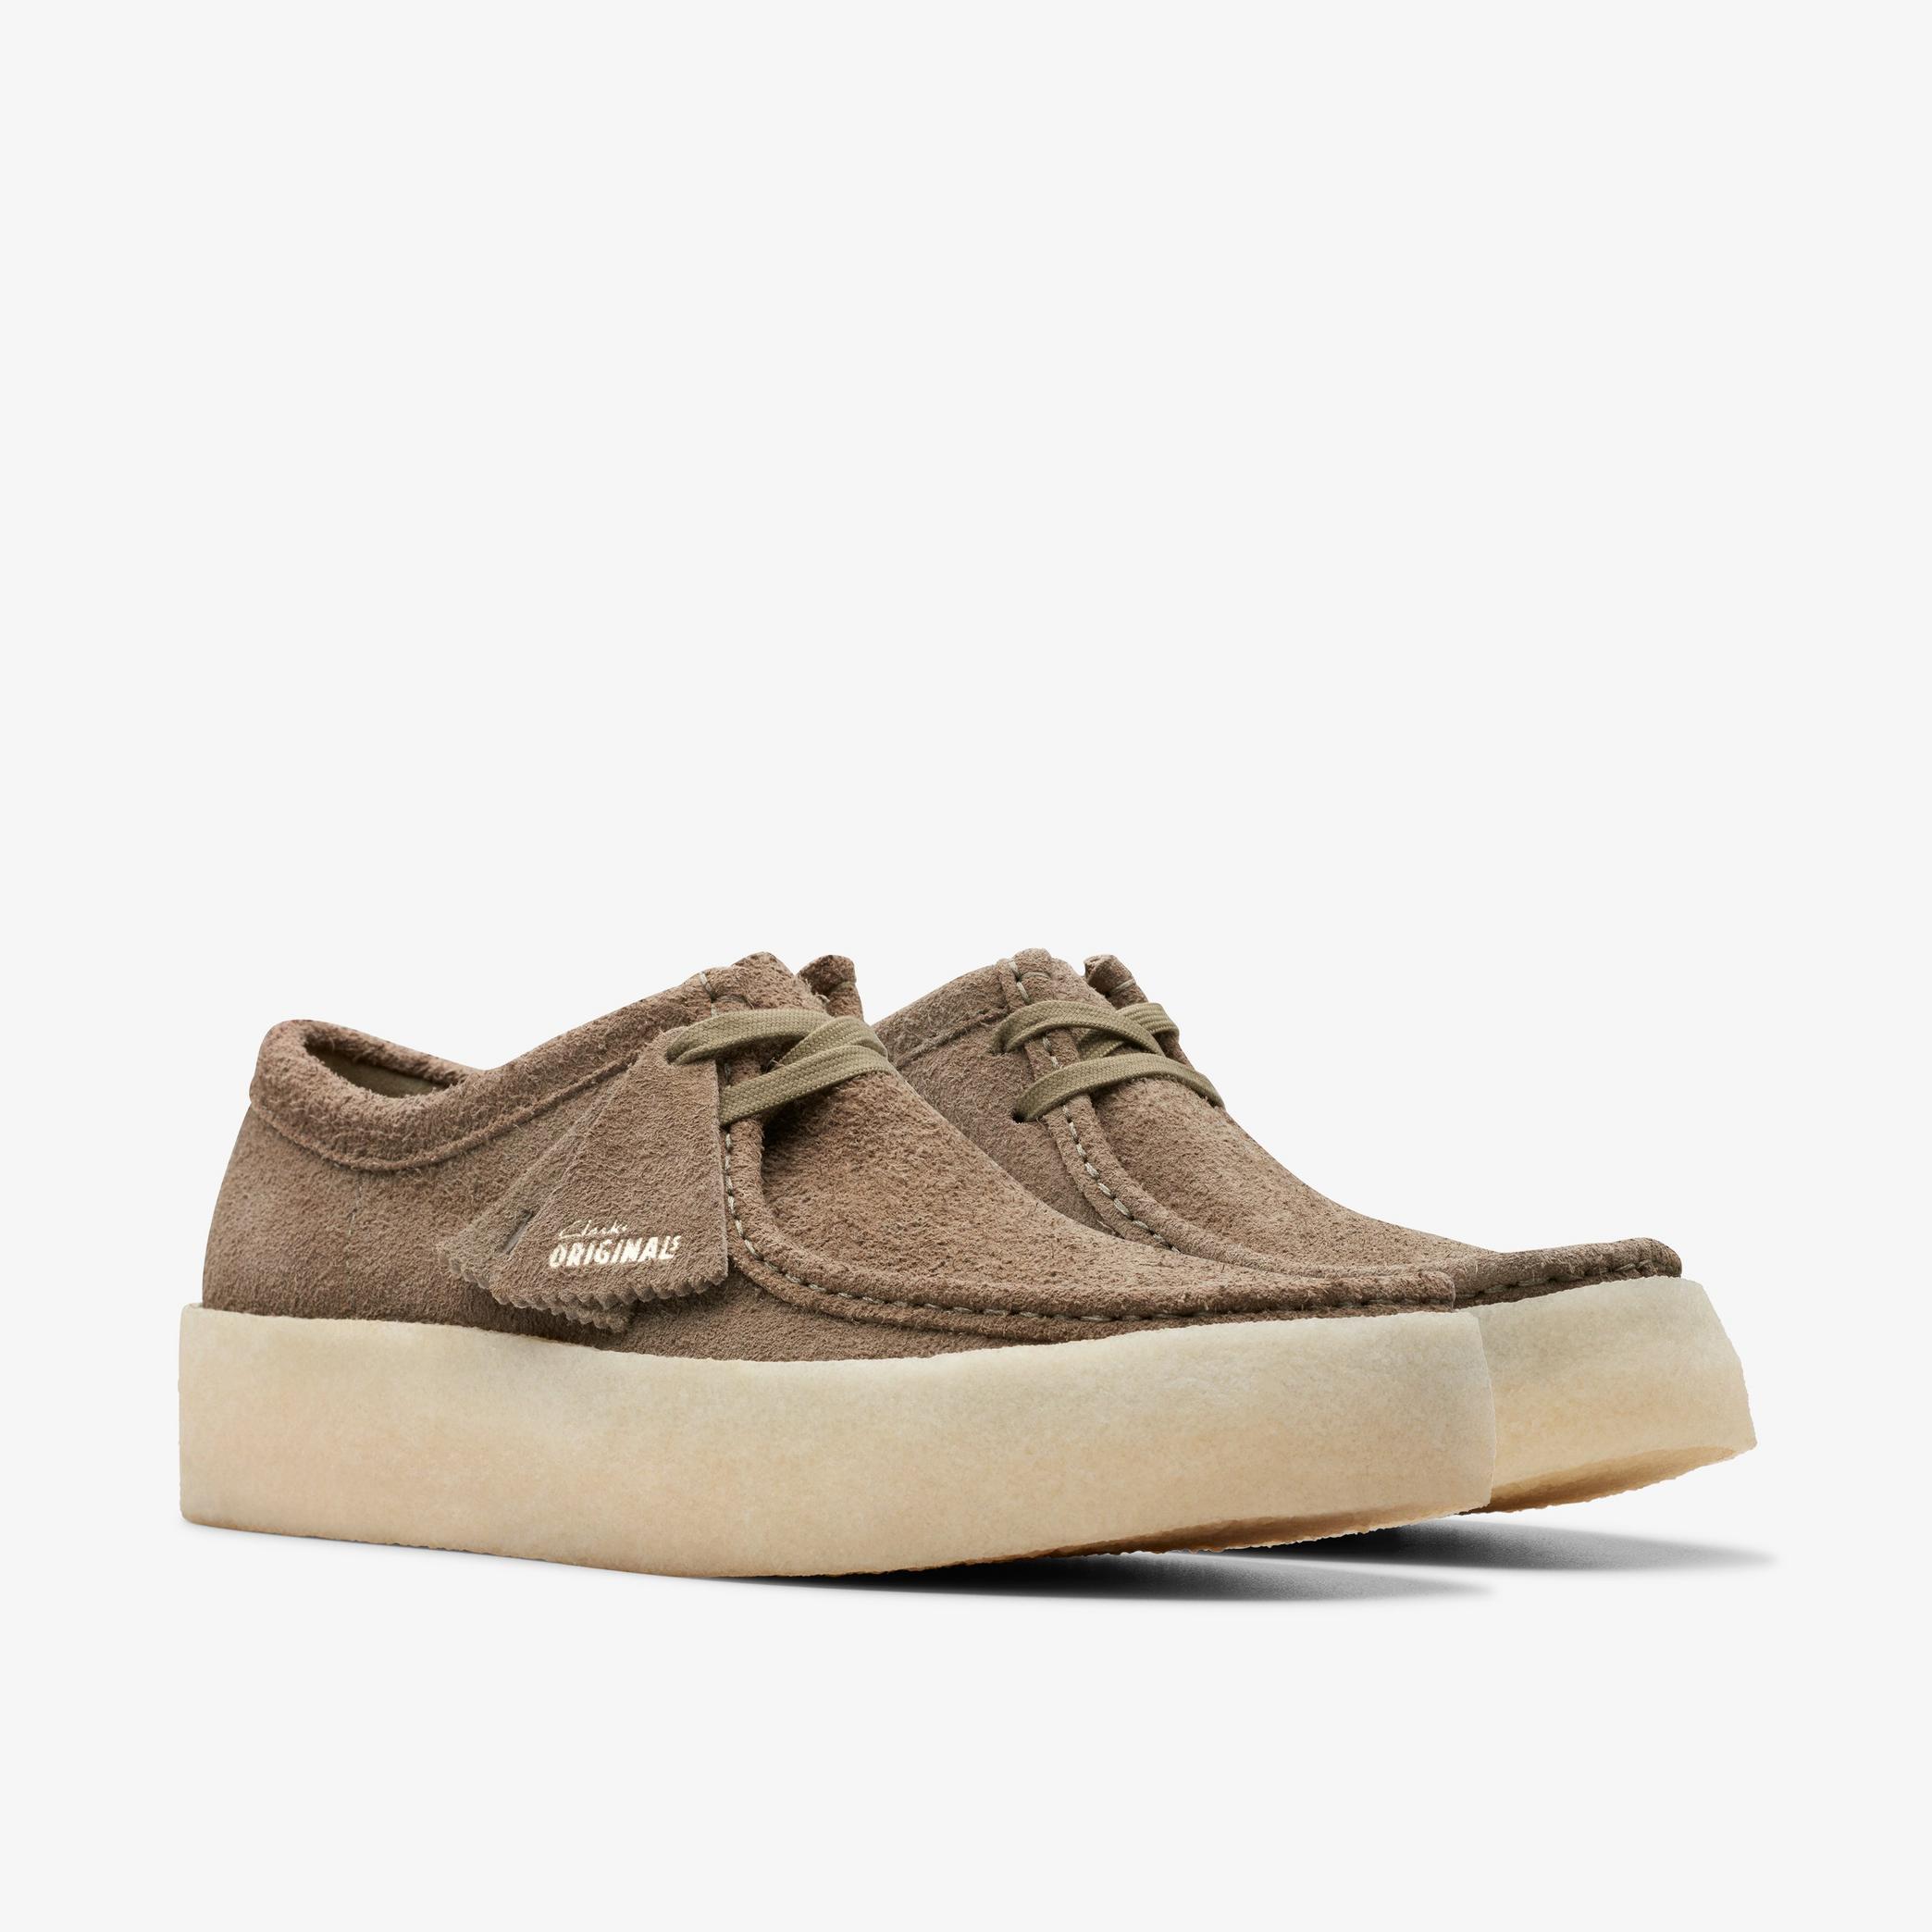 Wallabee Cup Pale Khaki Suede Wallabee, view 4 of 6